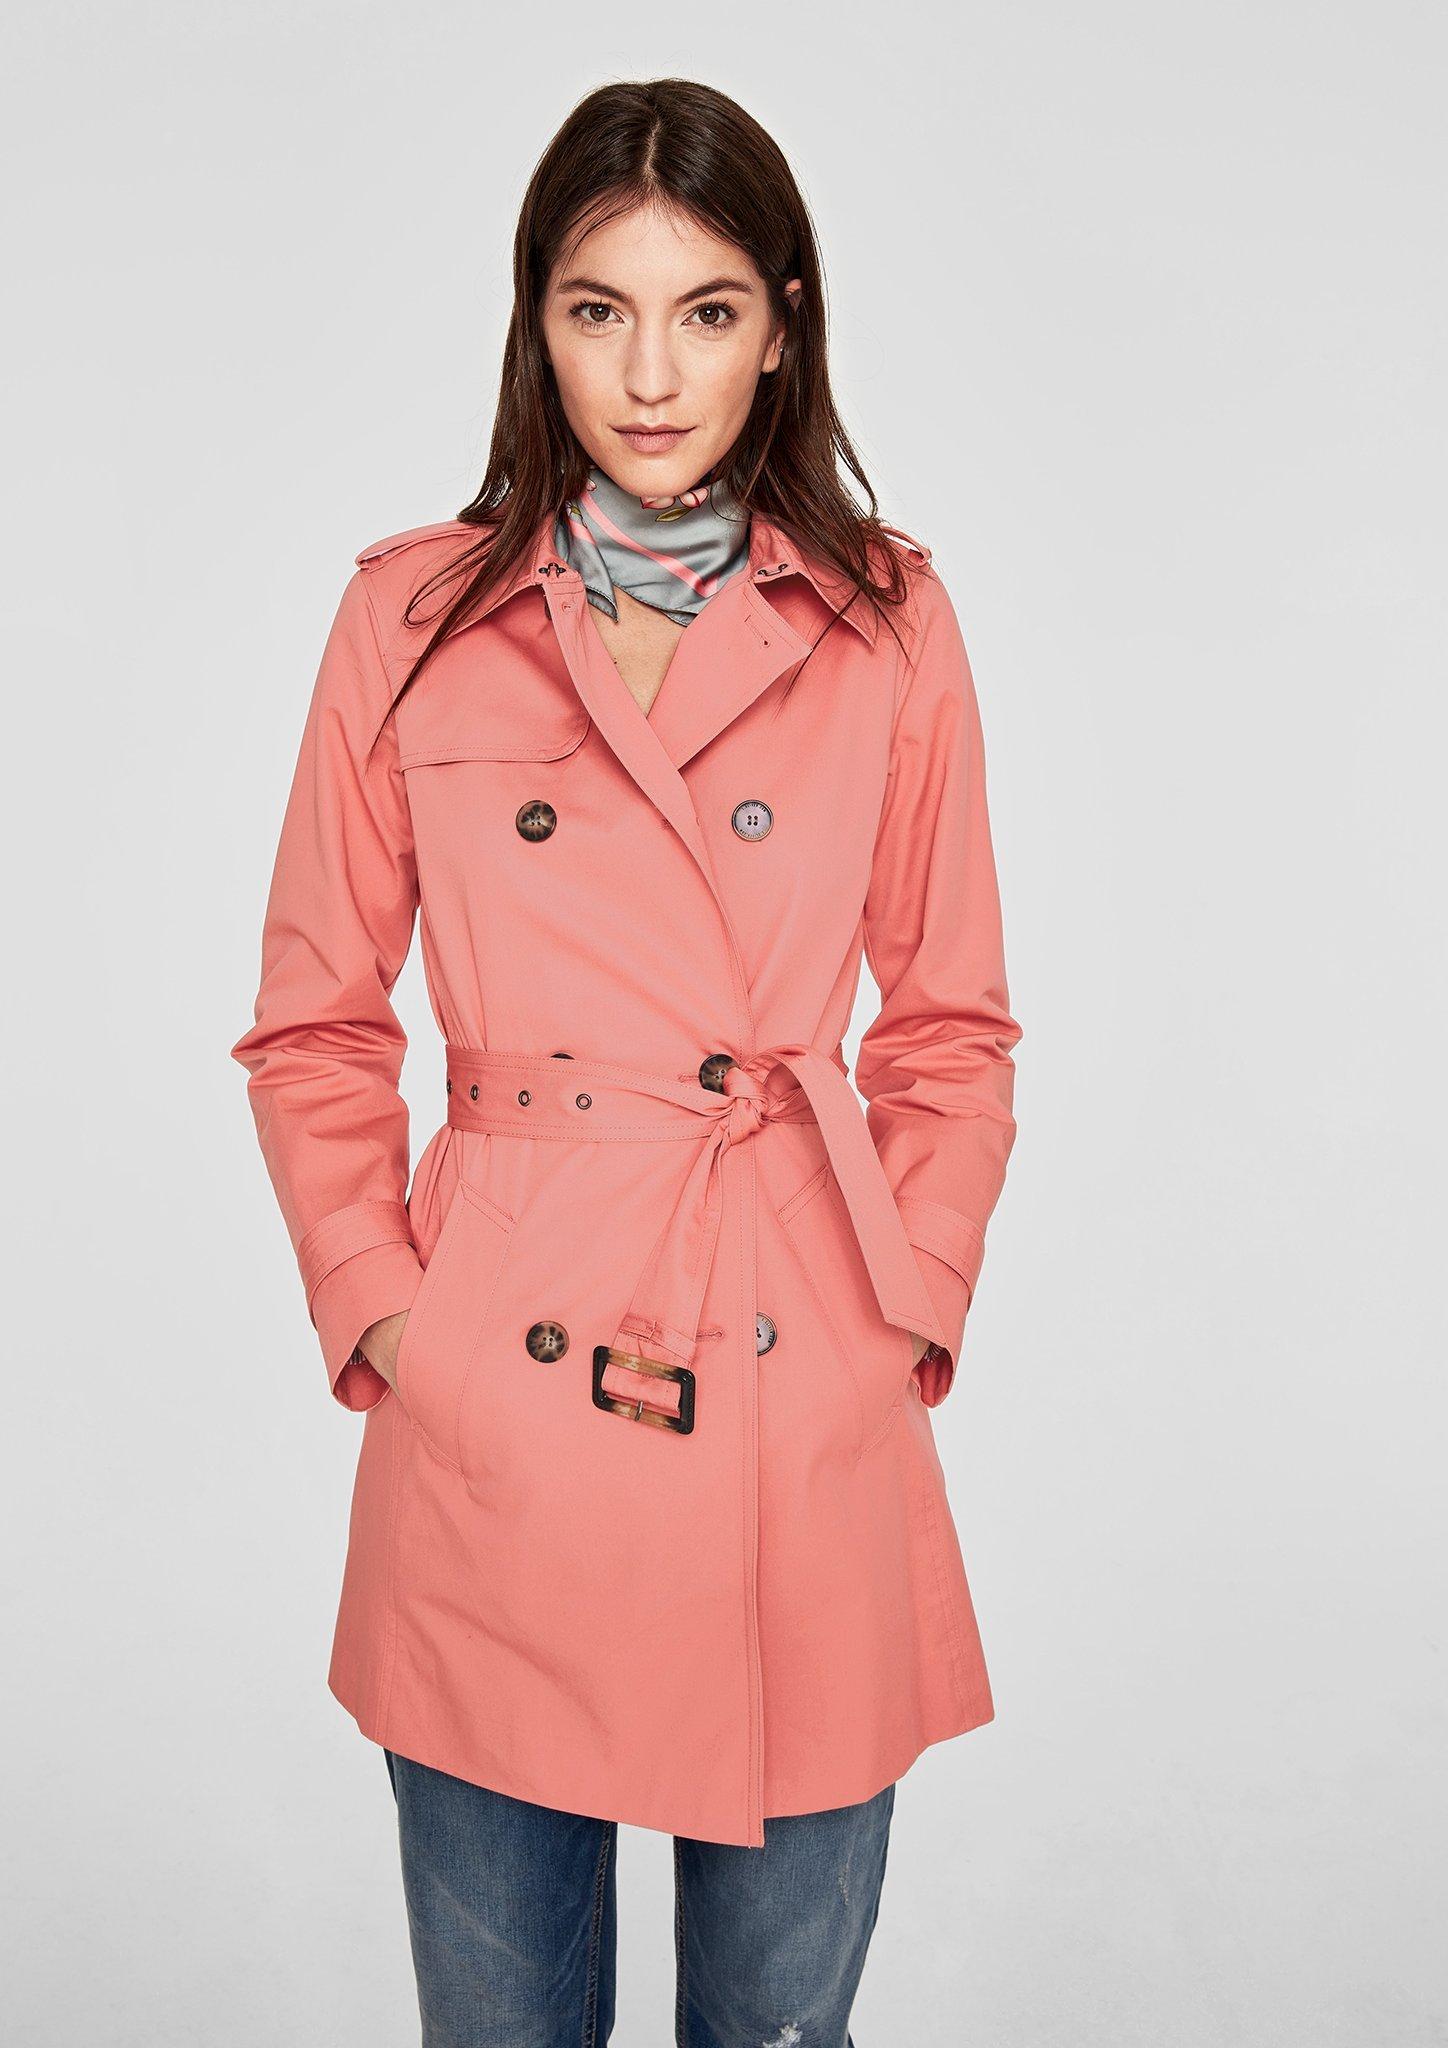 Coats for Women | s.Oliver